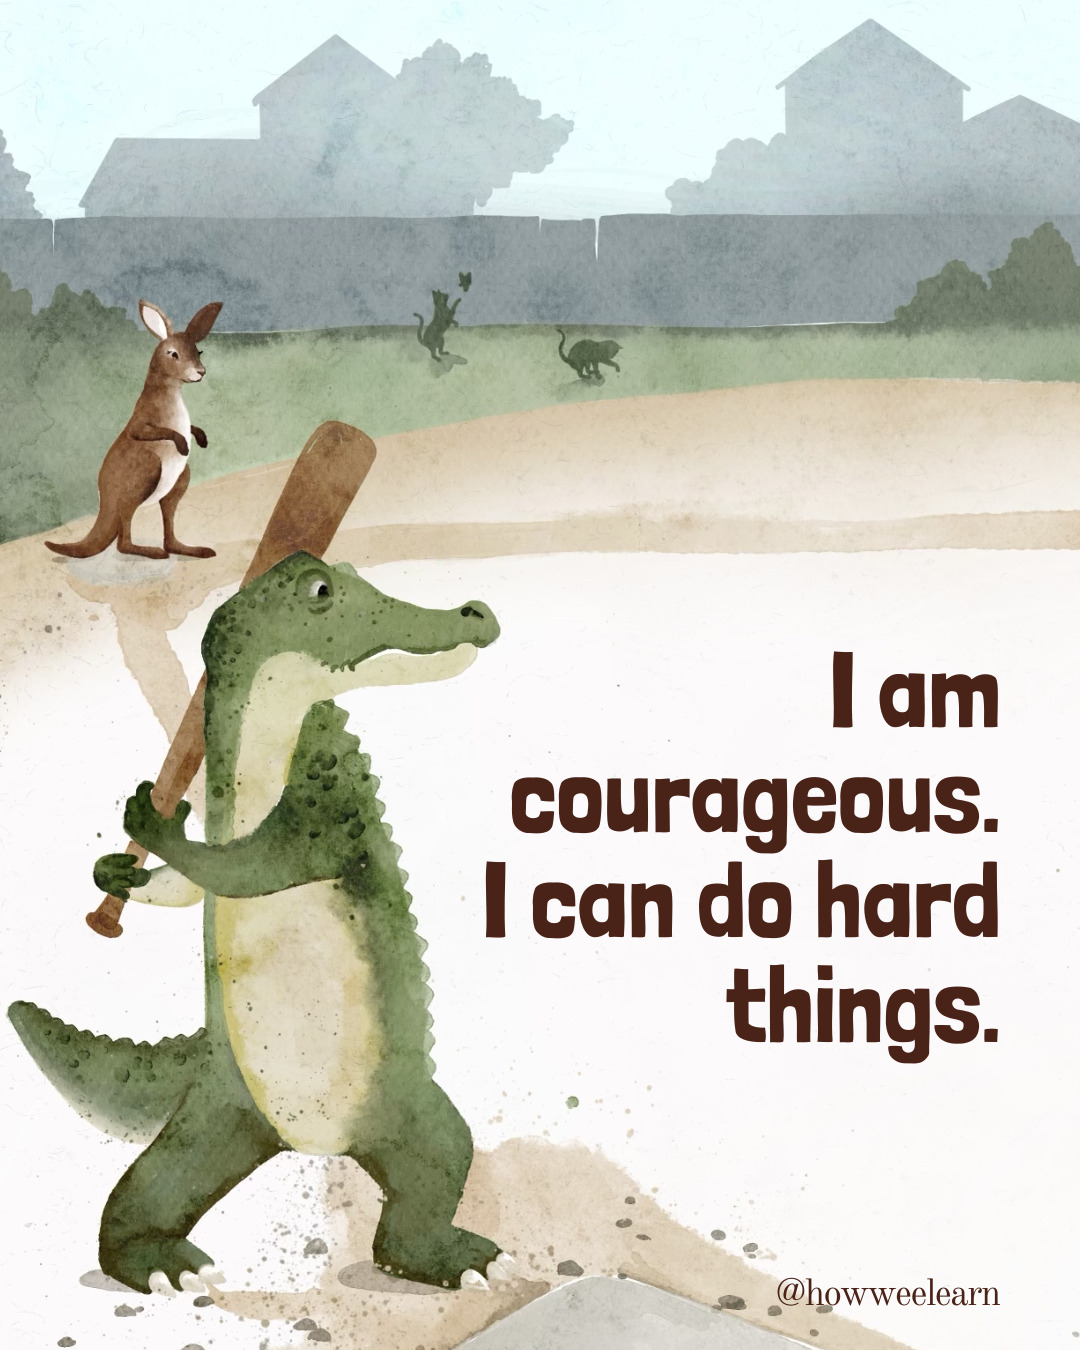 I am courageous. I can do hard things.